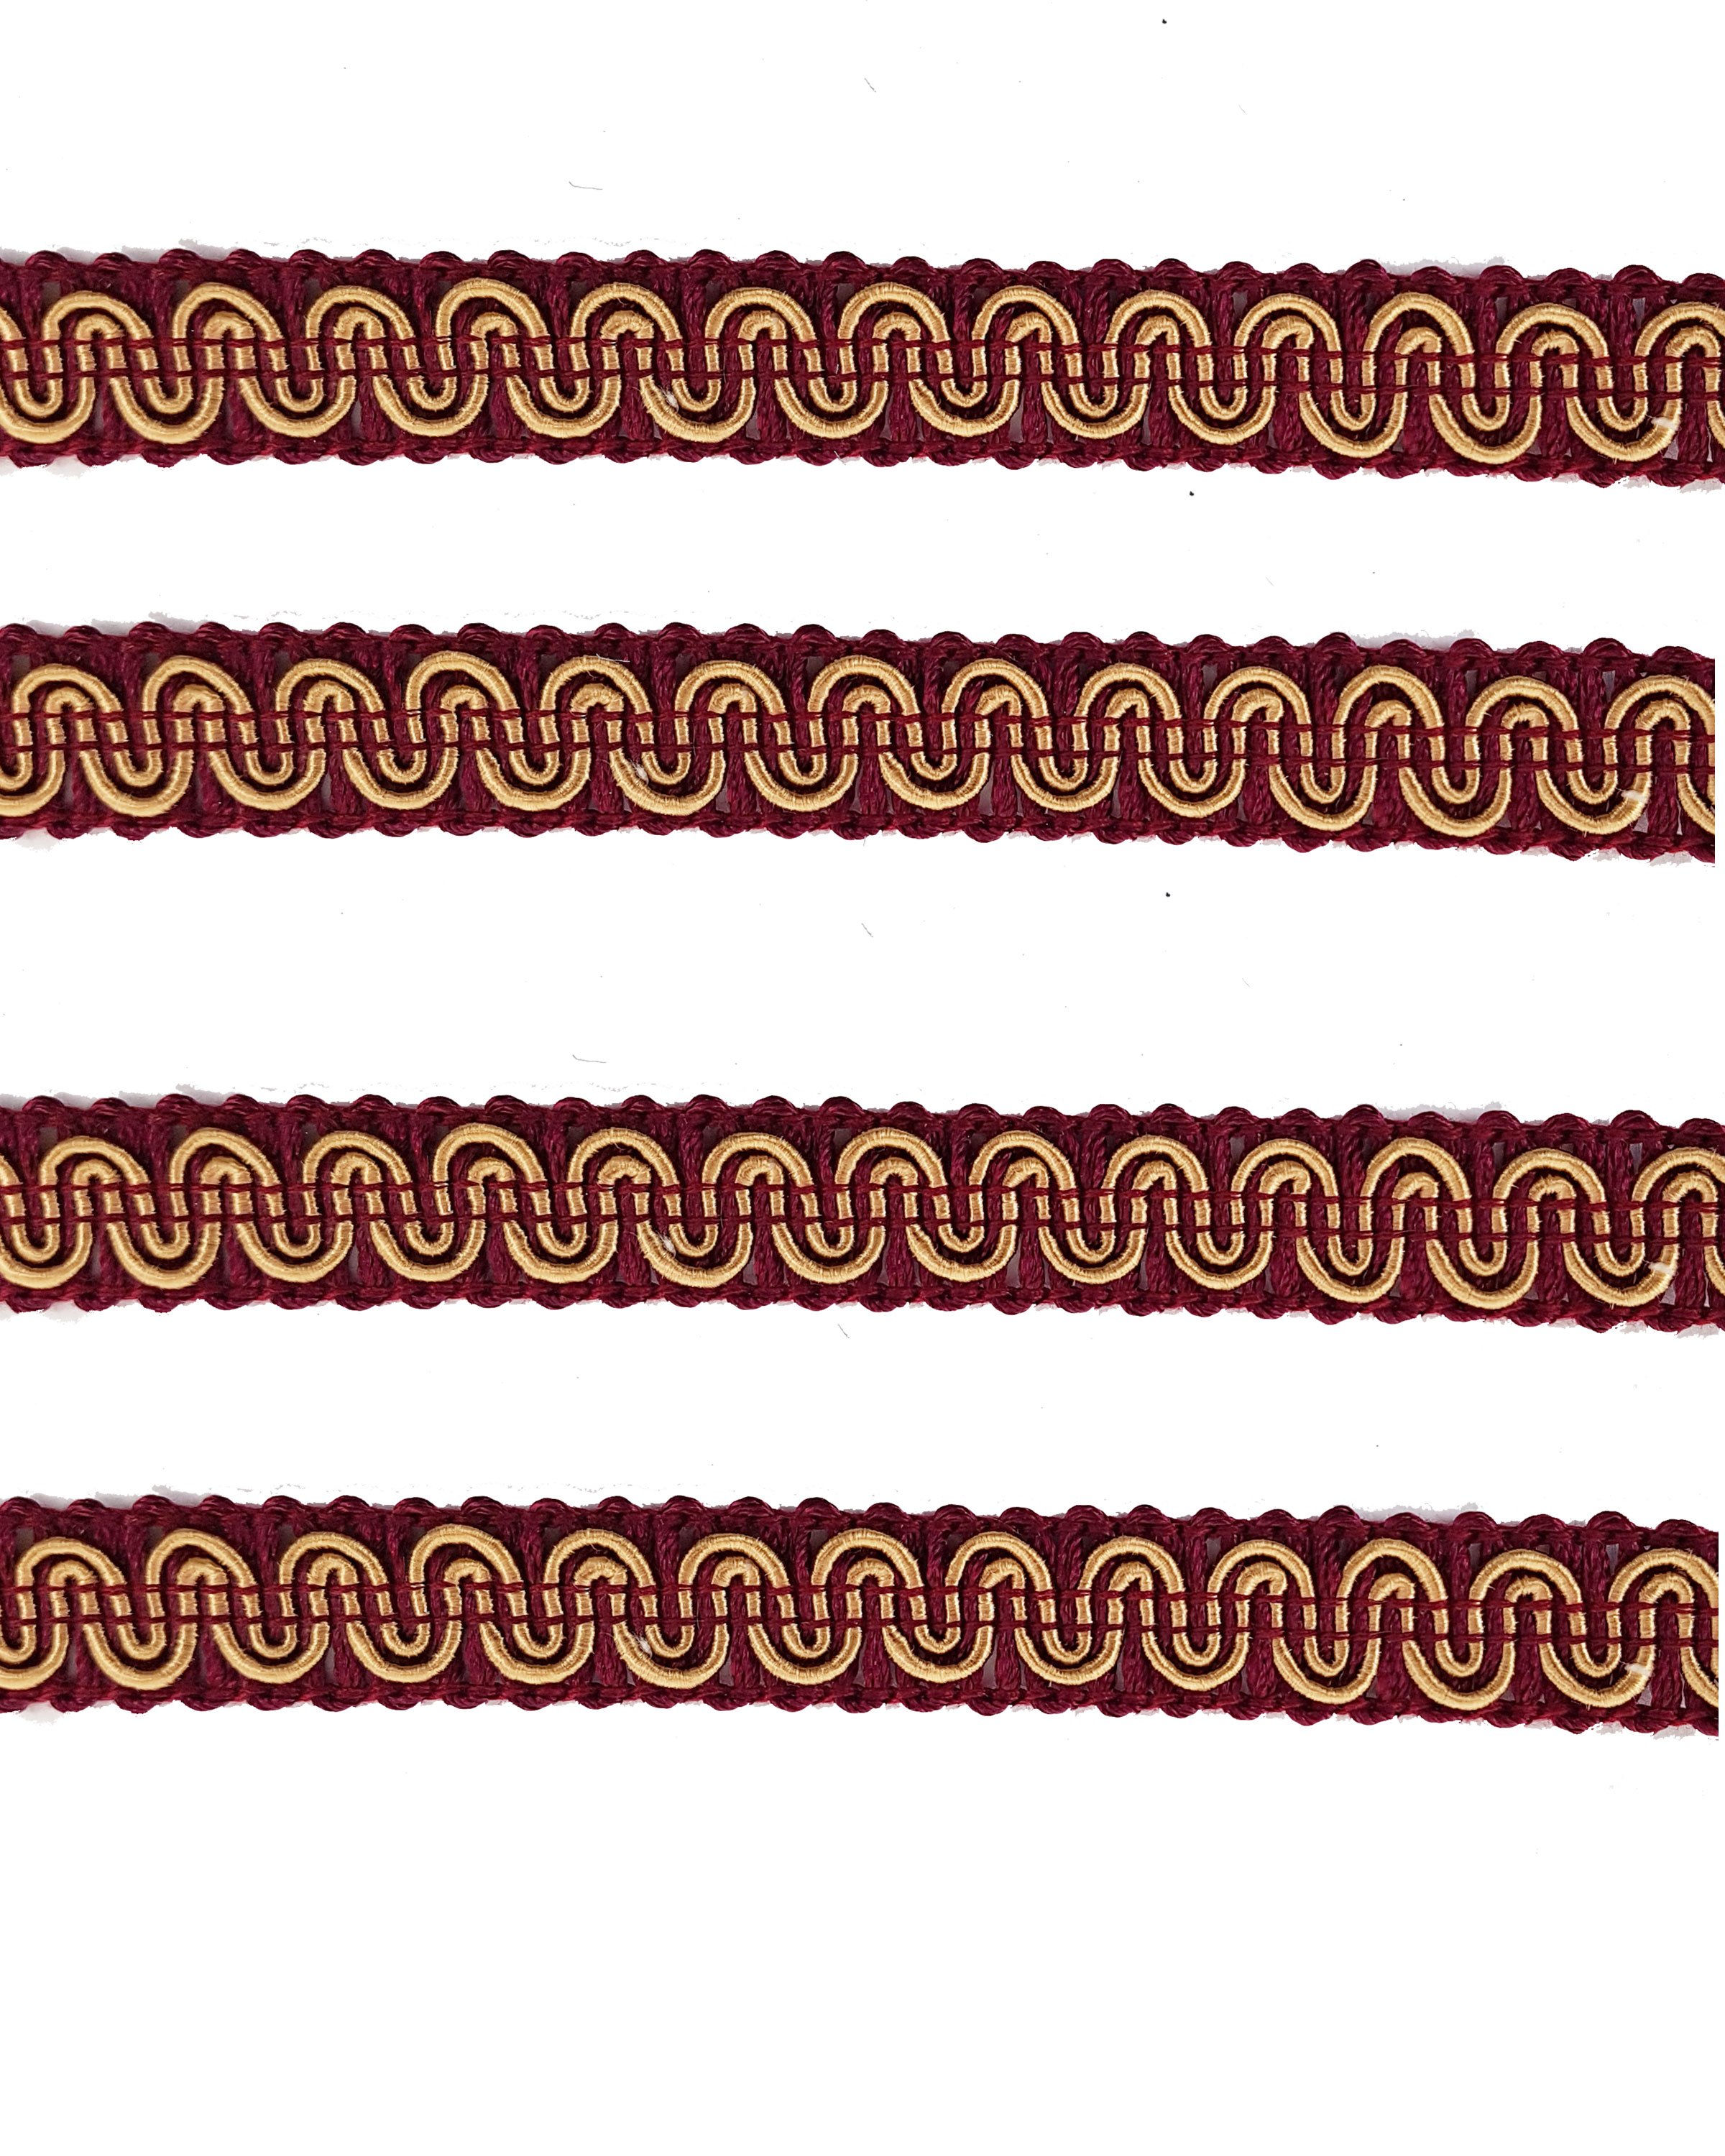 Upholstery Braid - Red Wine / Gold 14mm Price is for 5 metres